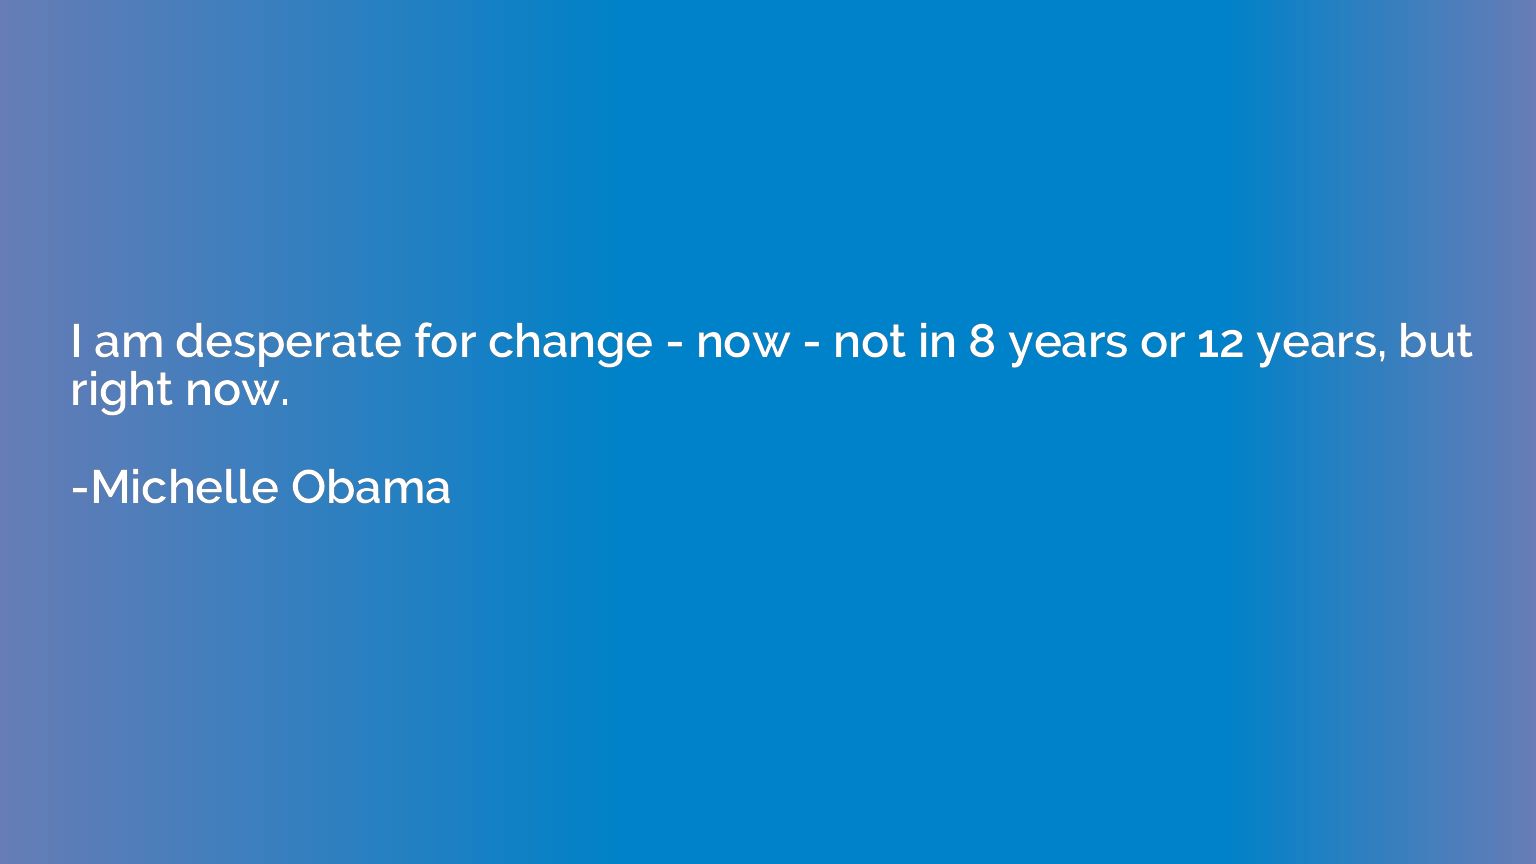 I am desperate for change - now - not in 8 years or 12 years